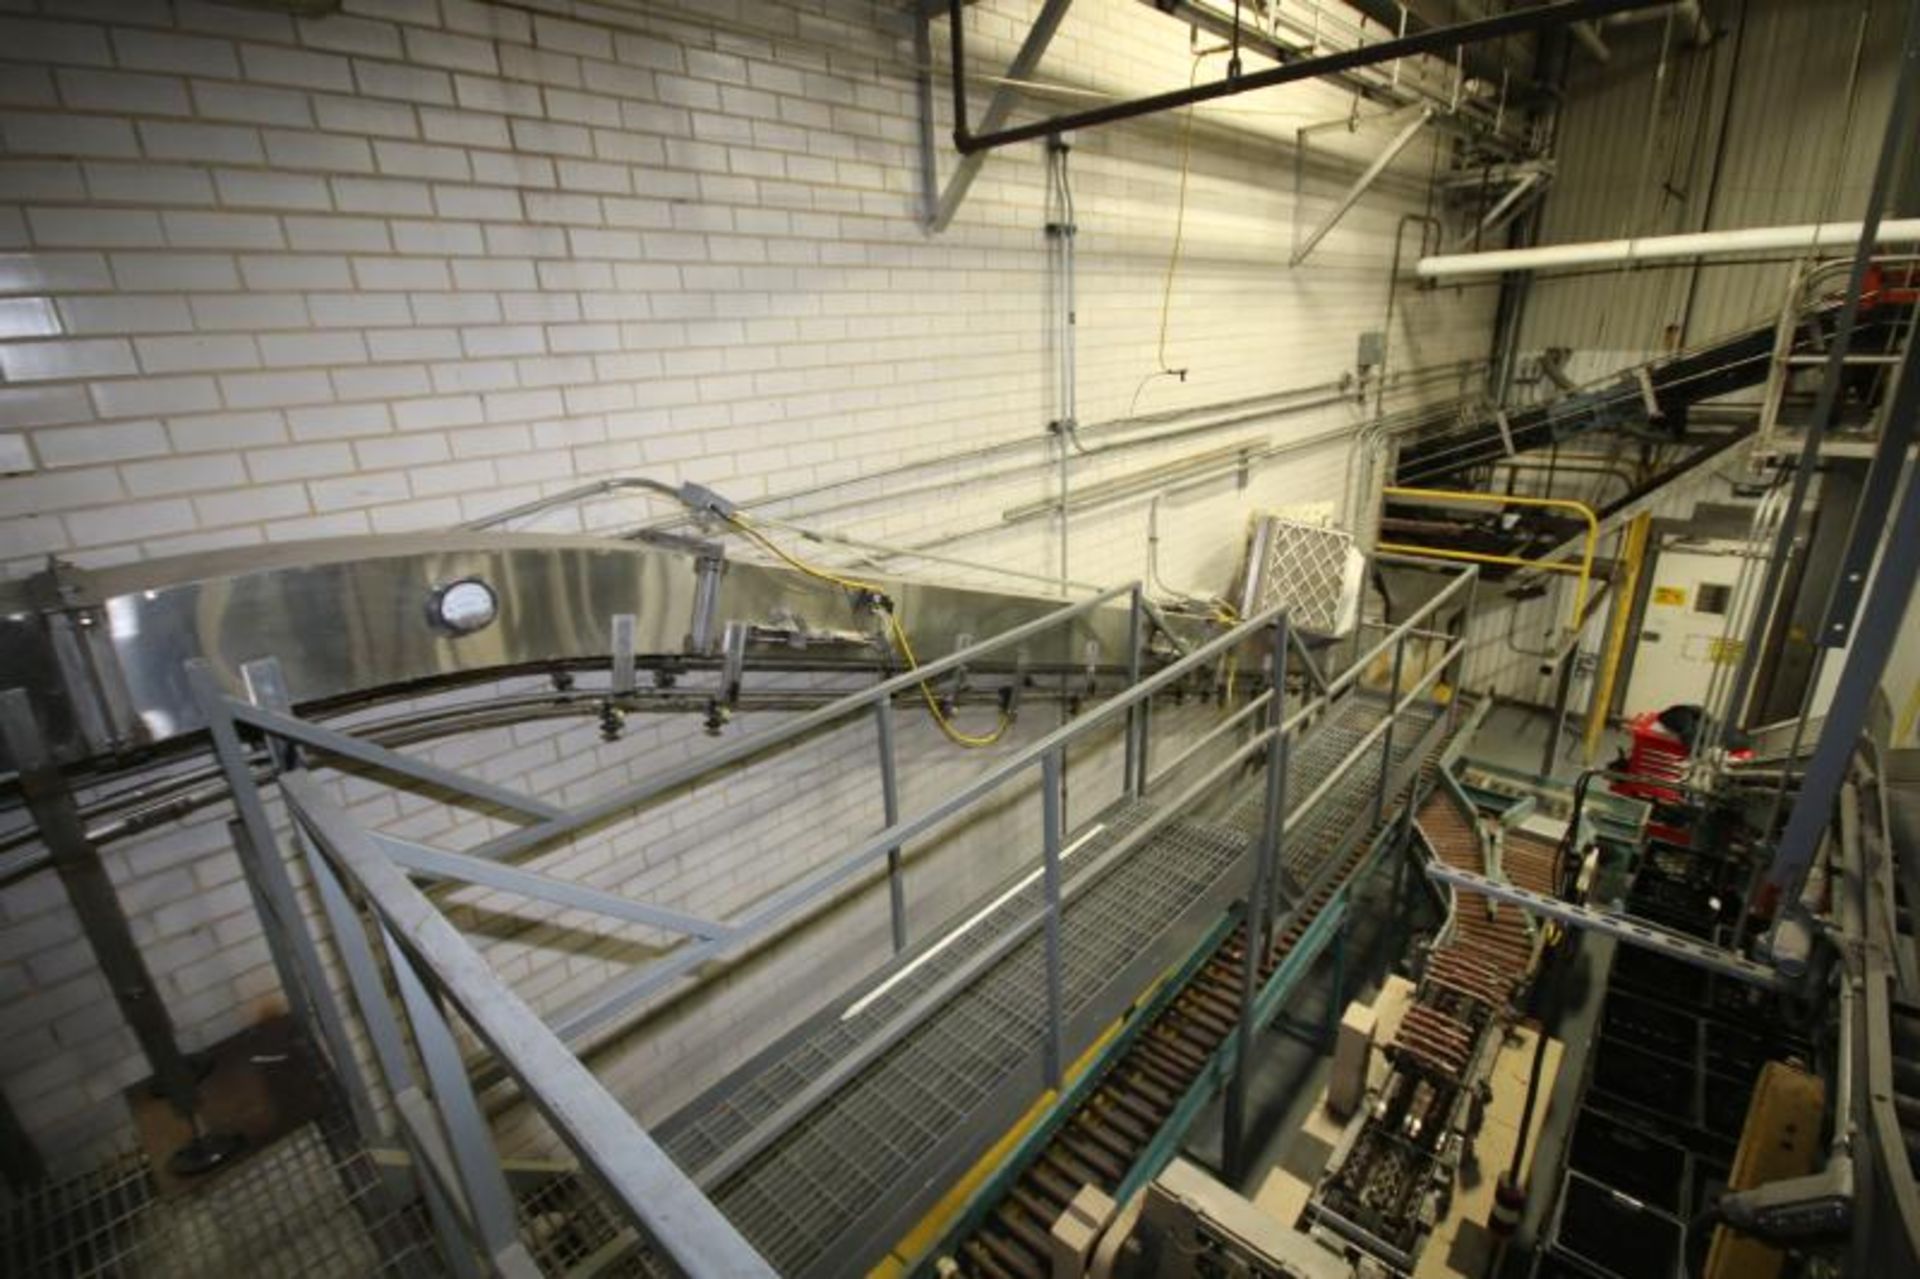 Aprox. 148 ft. L 2000 Ambec Airveyor / Conveyor System, All S/S with (2) Blowers, Housing Aprox. 14" - Image 7 of 8